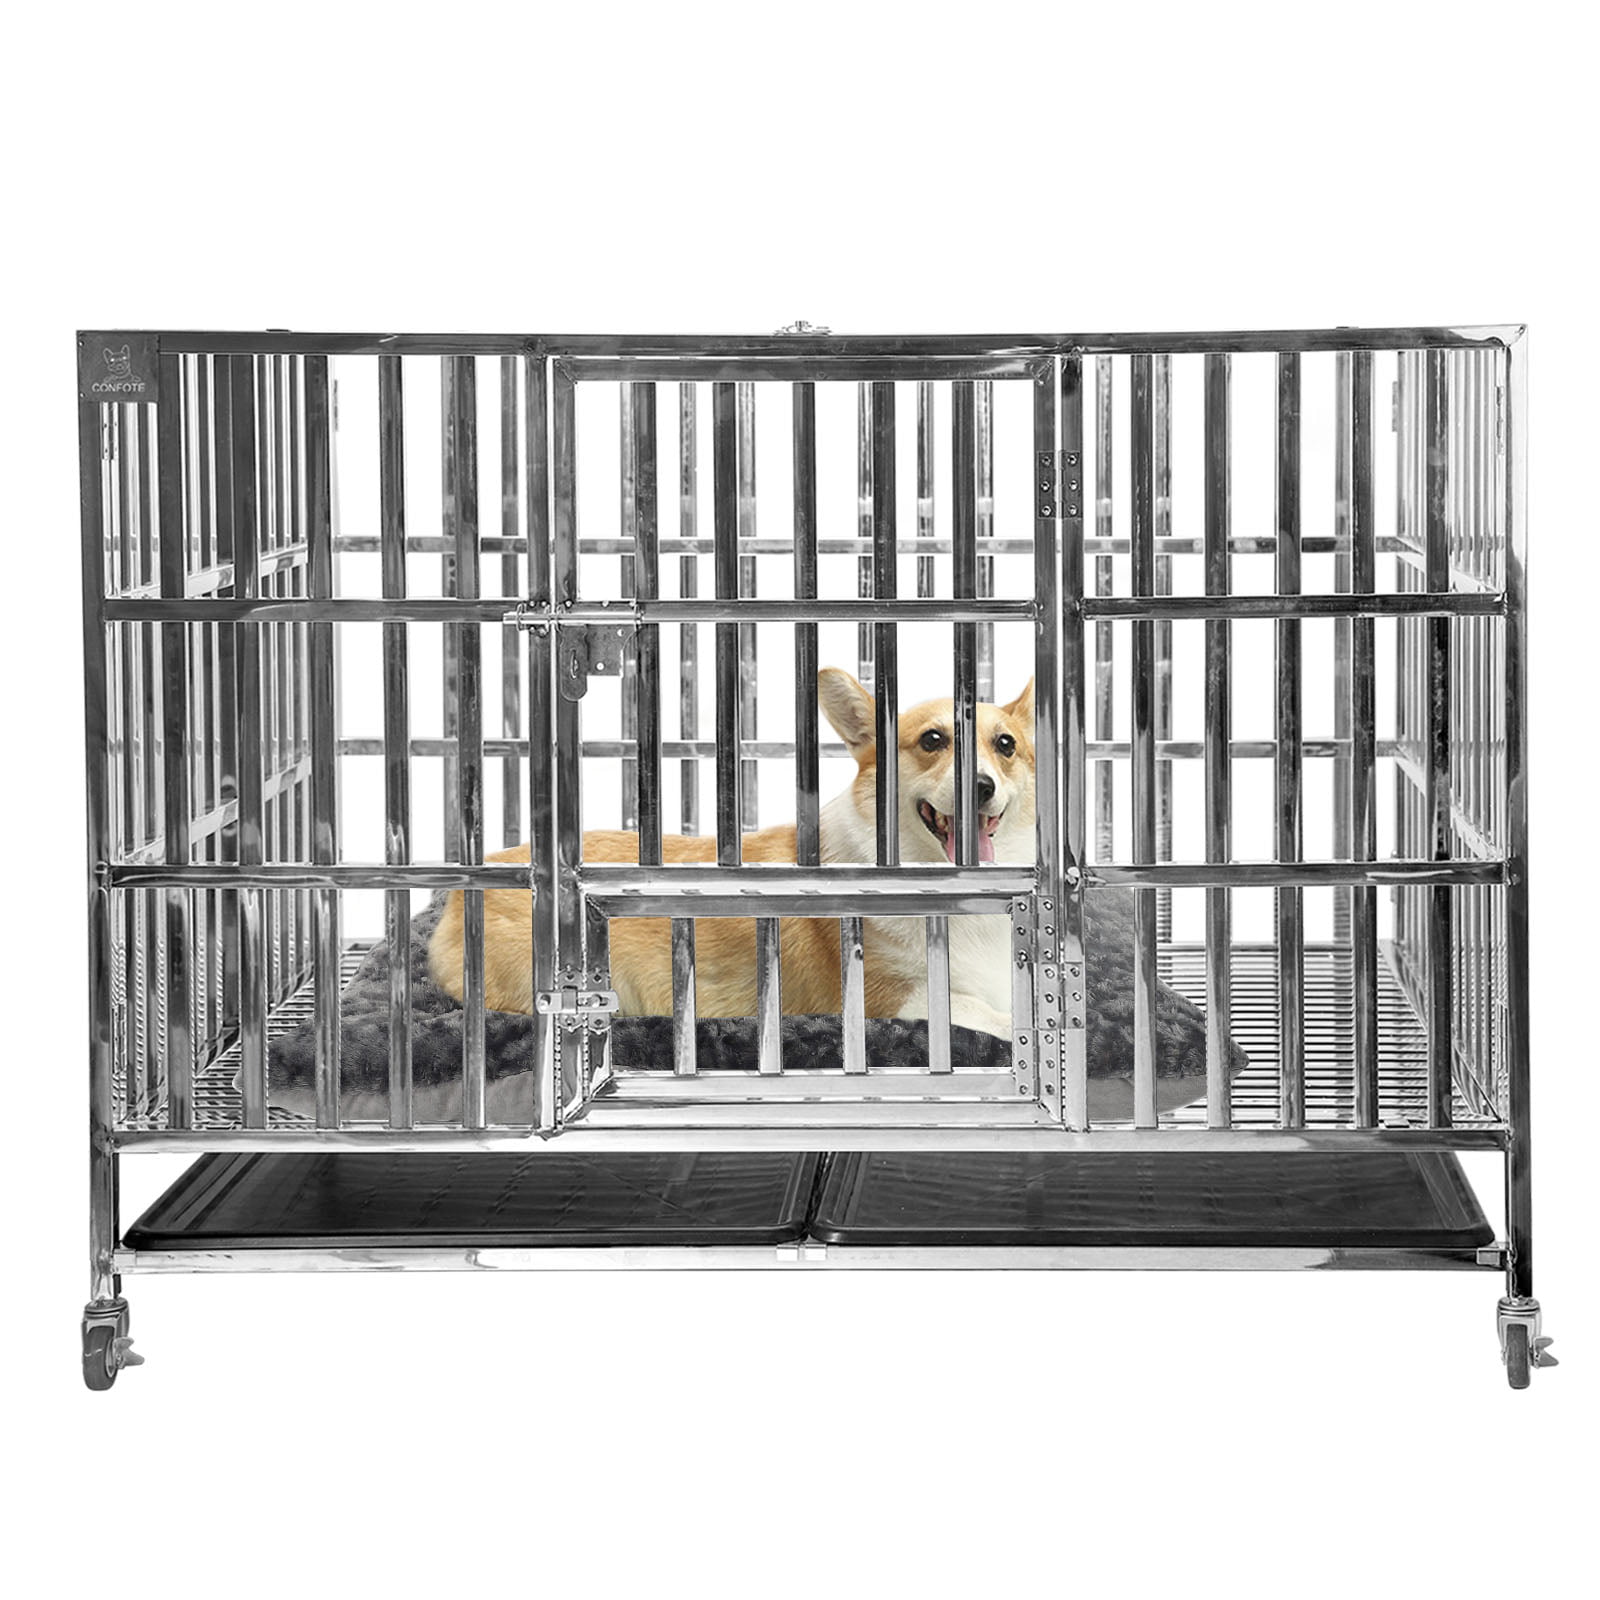 Heavy Duty Dog Crate by Tear Resistant Square Tube 38inch Indestructible Higher Metal Dog Playpen Military Pet Cage with 2 Prevent Escape Lock 